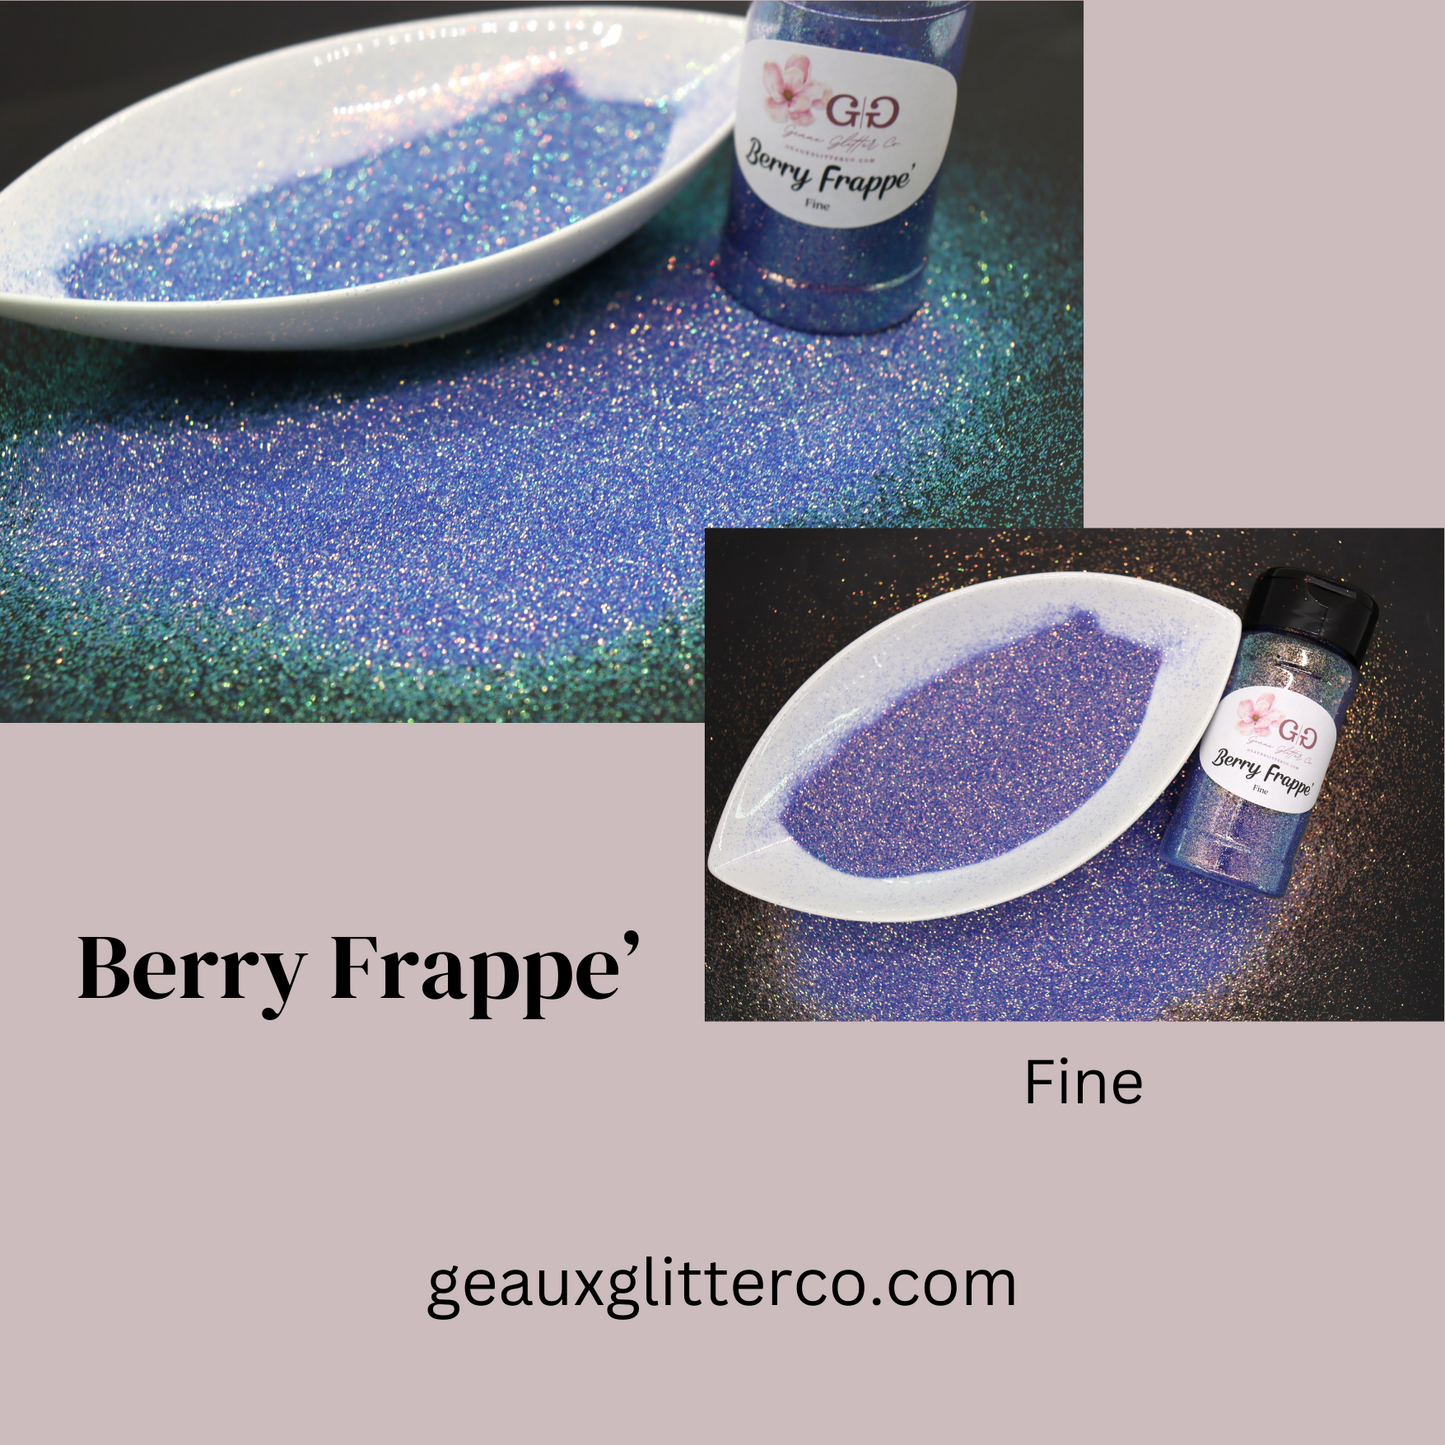 Berry Frappe' - Fine